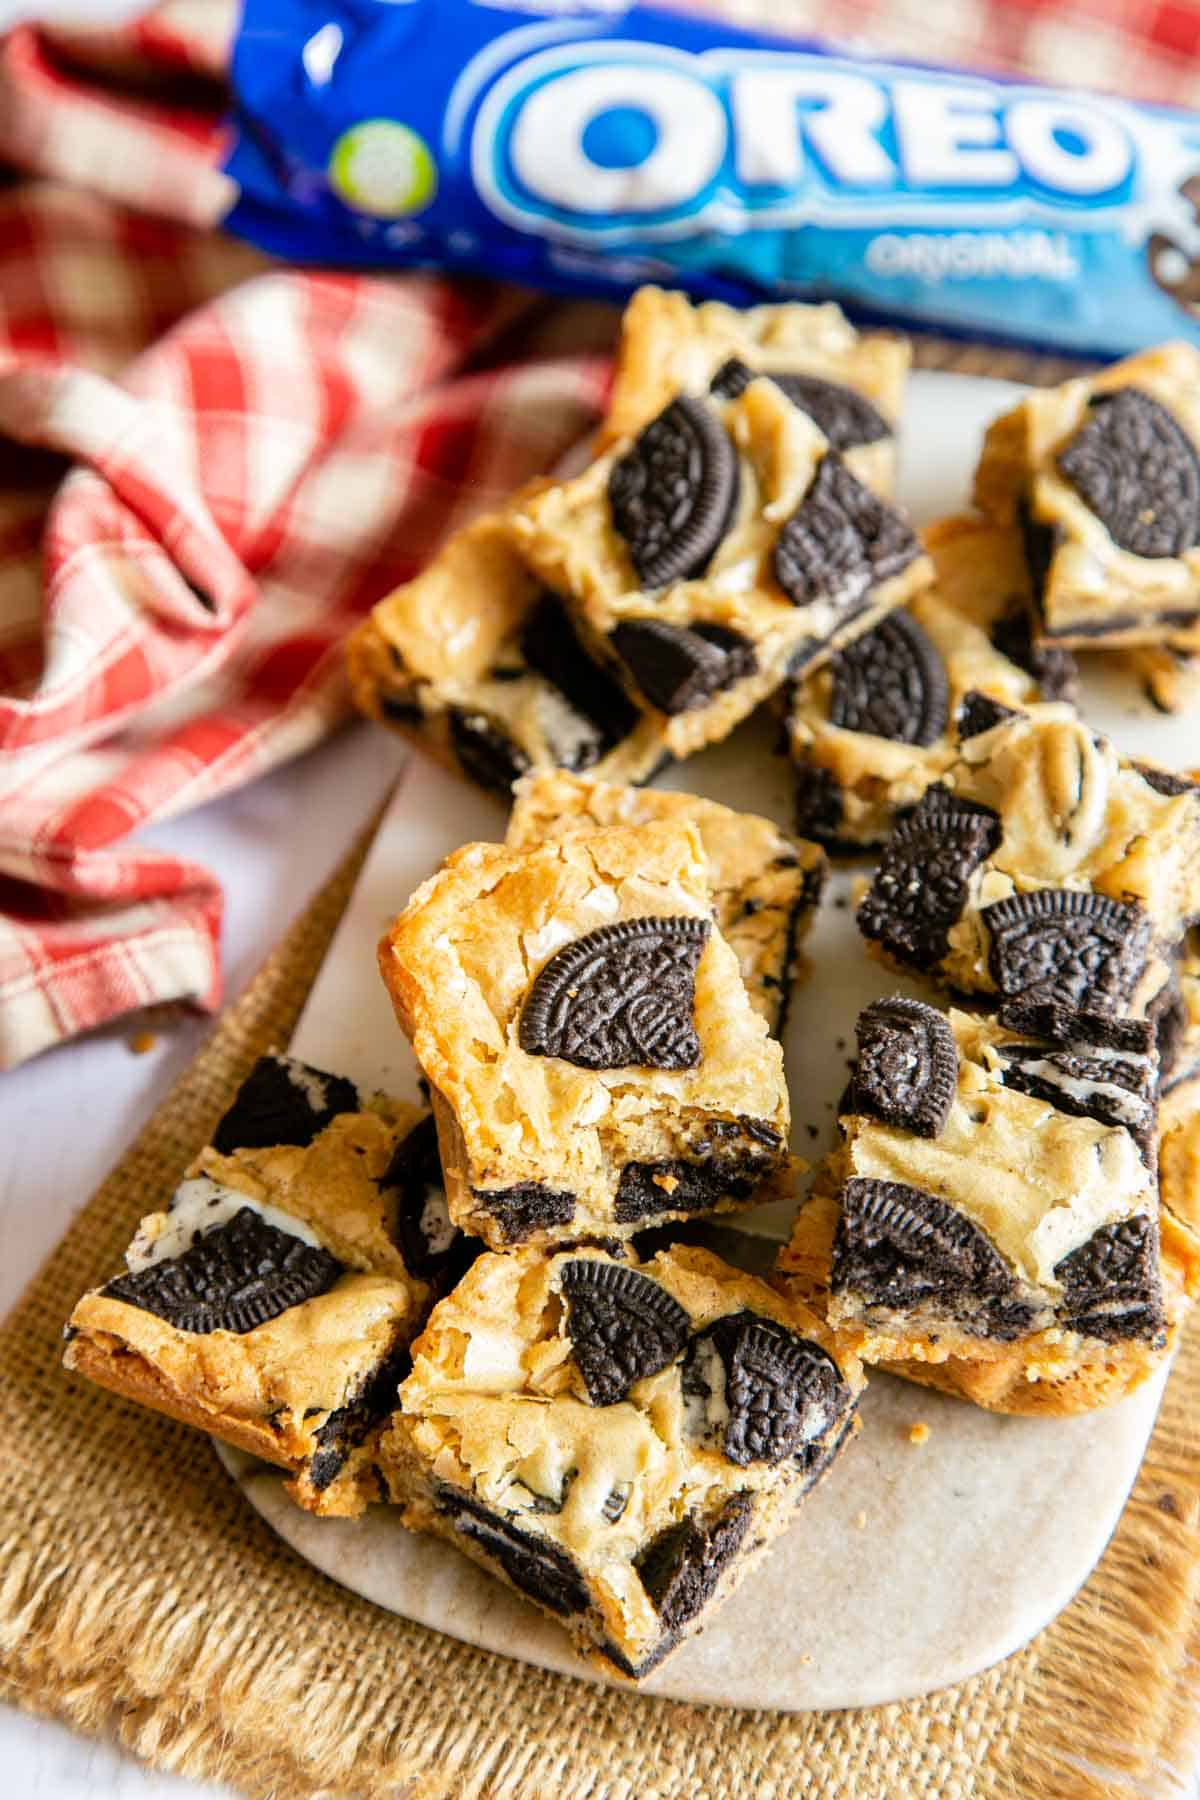 Cookies and cream blondies on a serving board, the dark cocoa biscuits contrasting with the golden blondie crust.